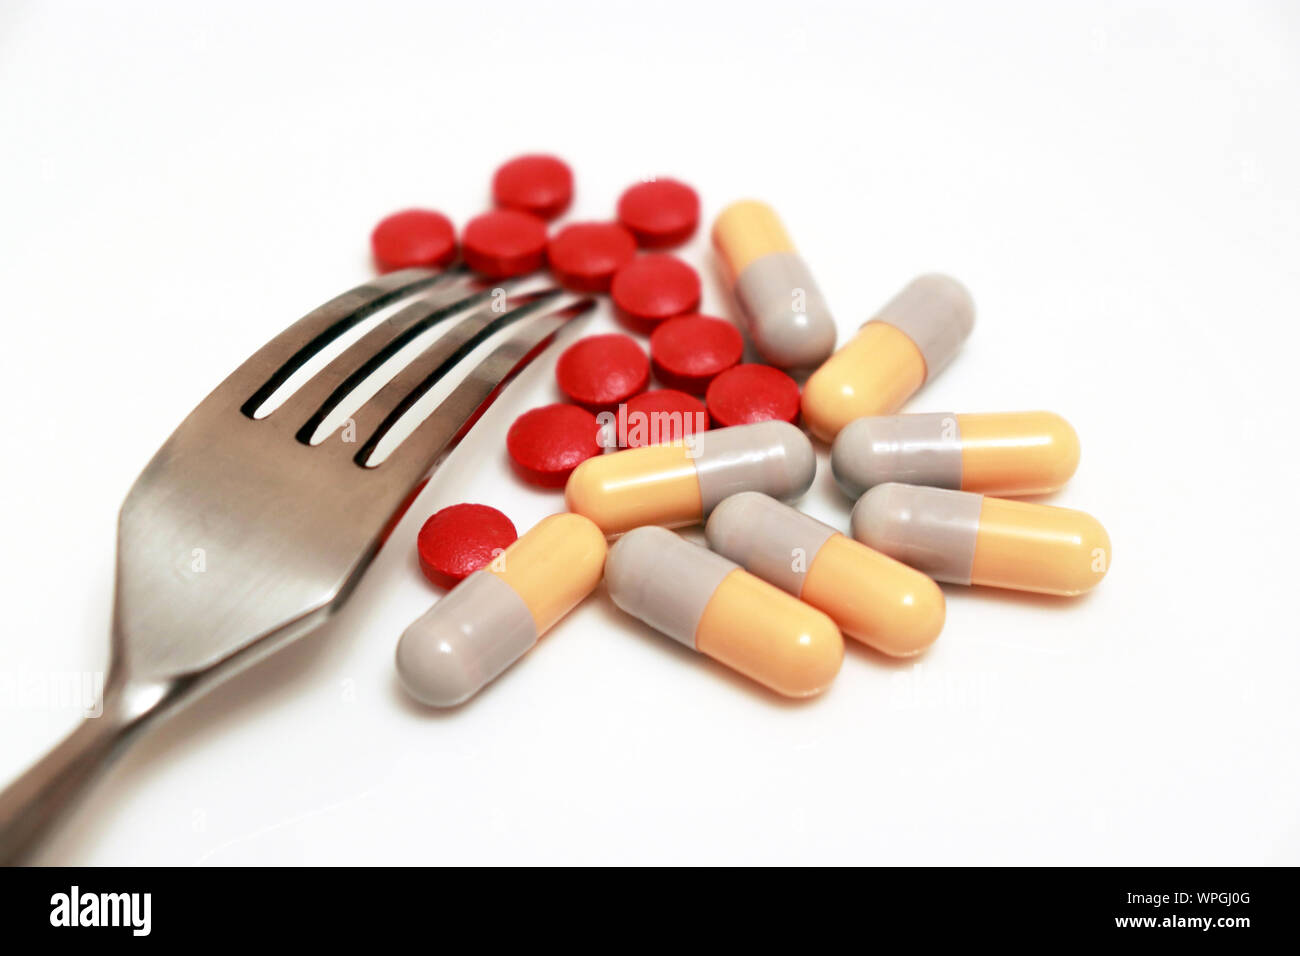 Pills and capsules with fork on white plate. Concept of slimming, diet pills, healthy eating, vitamins, fortified food Stock Photo